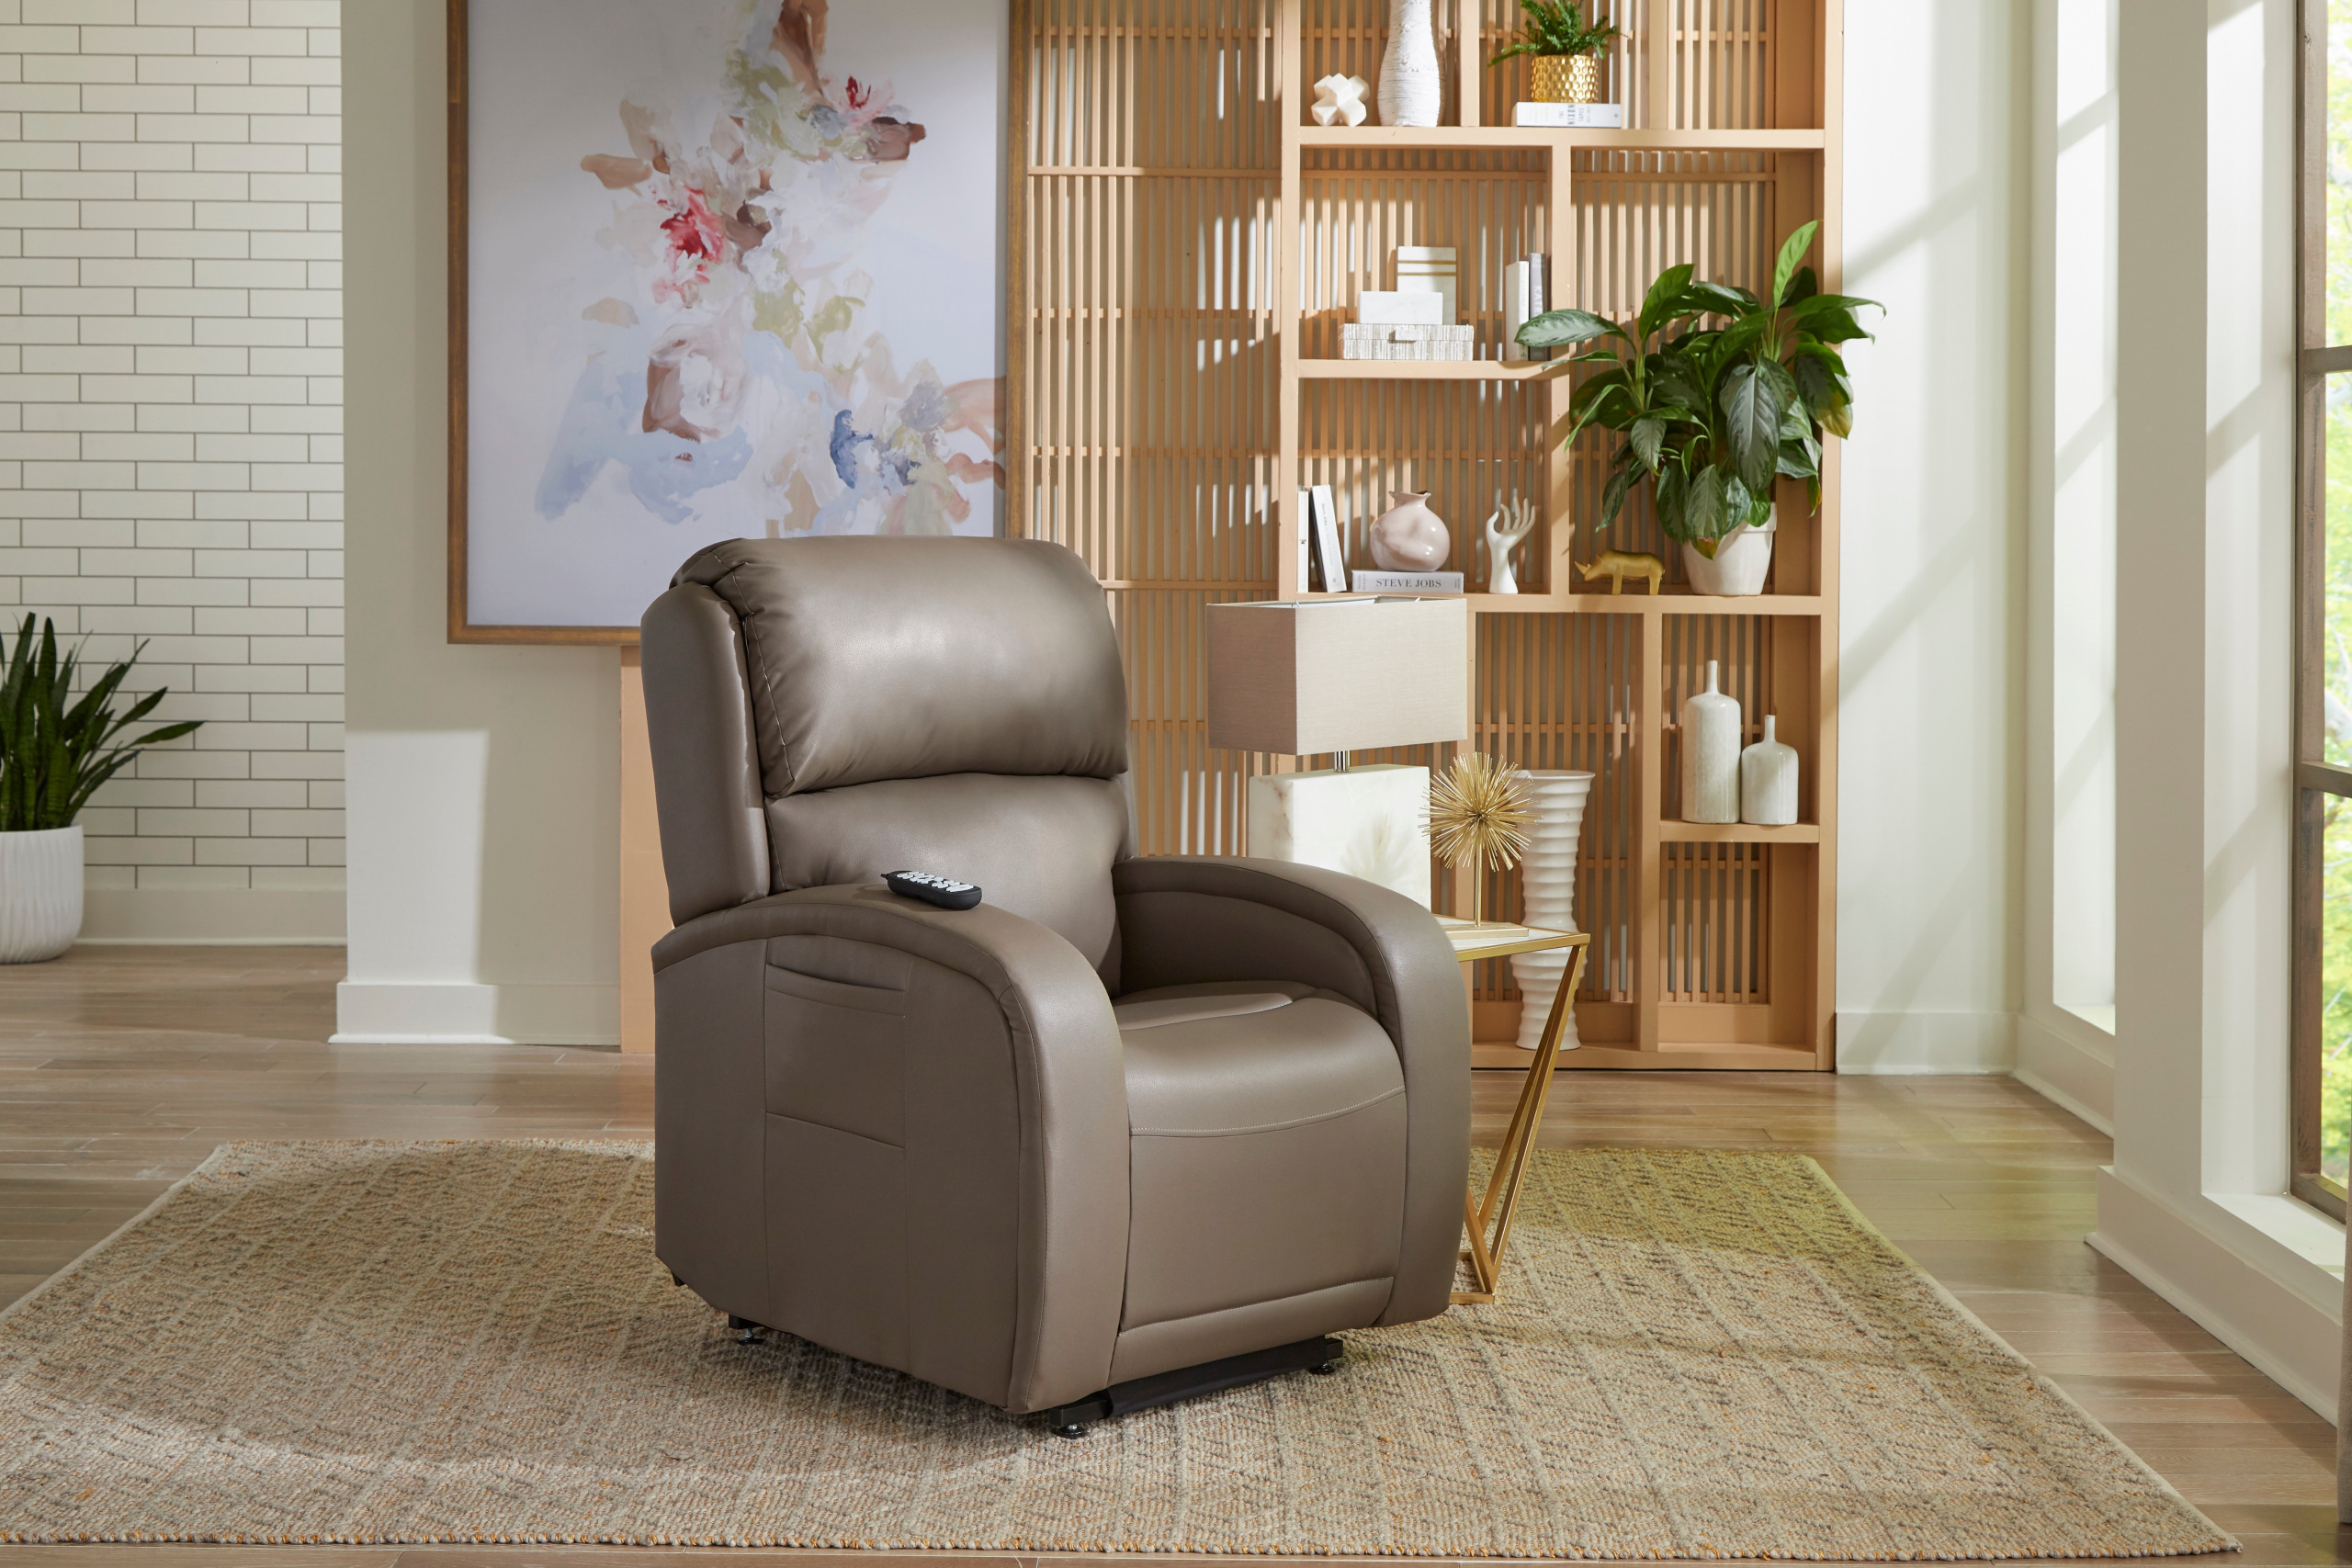 Sleeper Chairs & Recliner Chairs for Hospitals